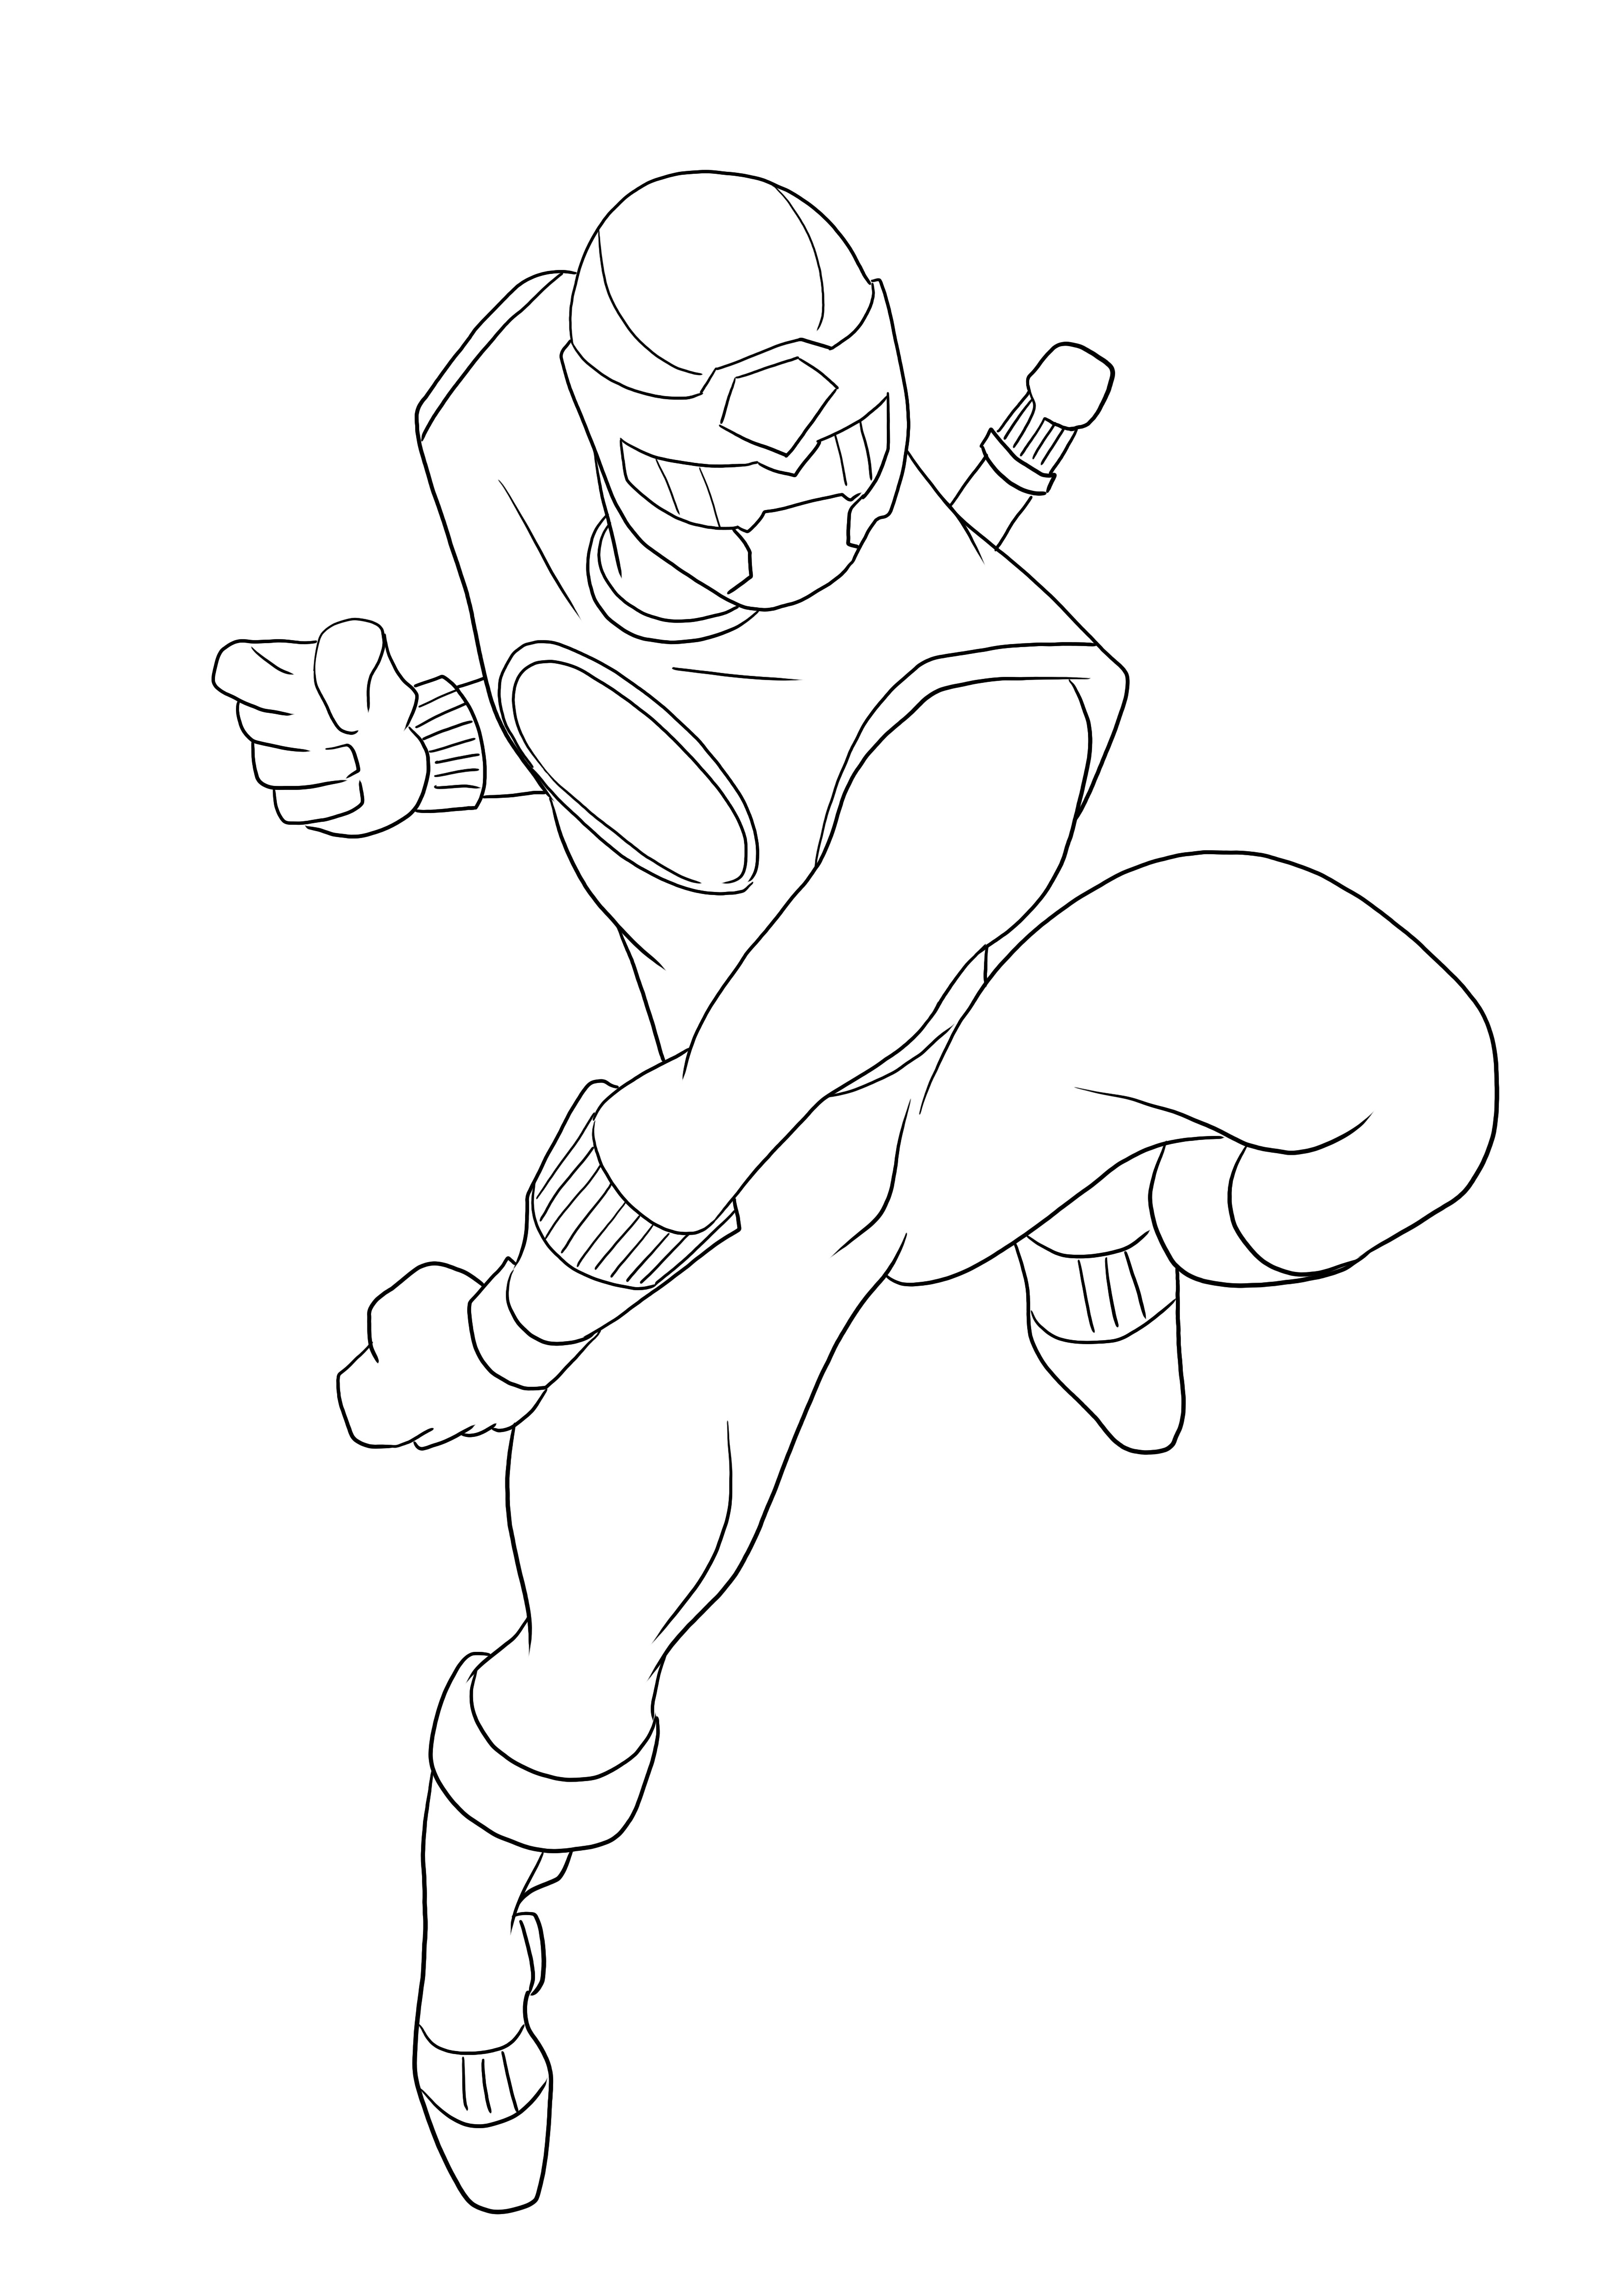 Power Ranger free printable for coloring to learn about all Marvel heroes